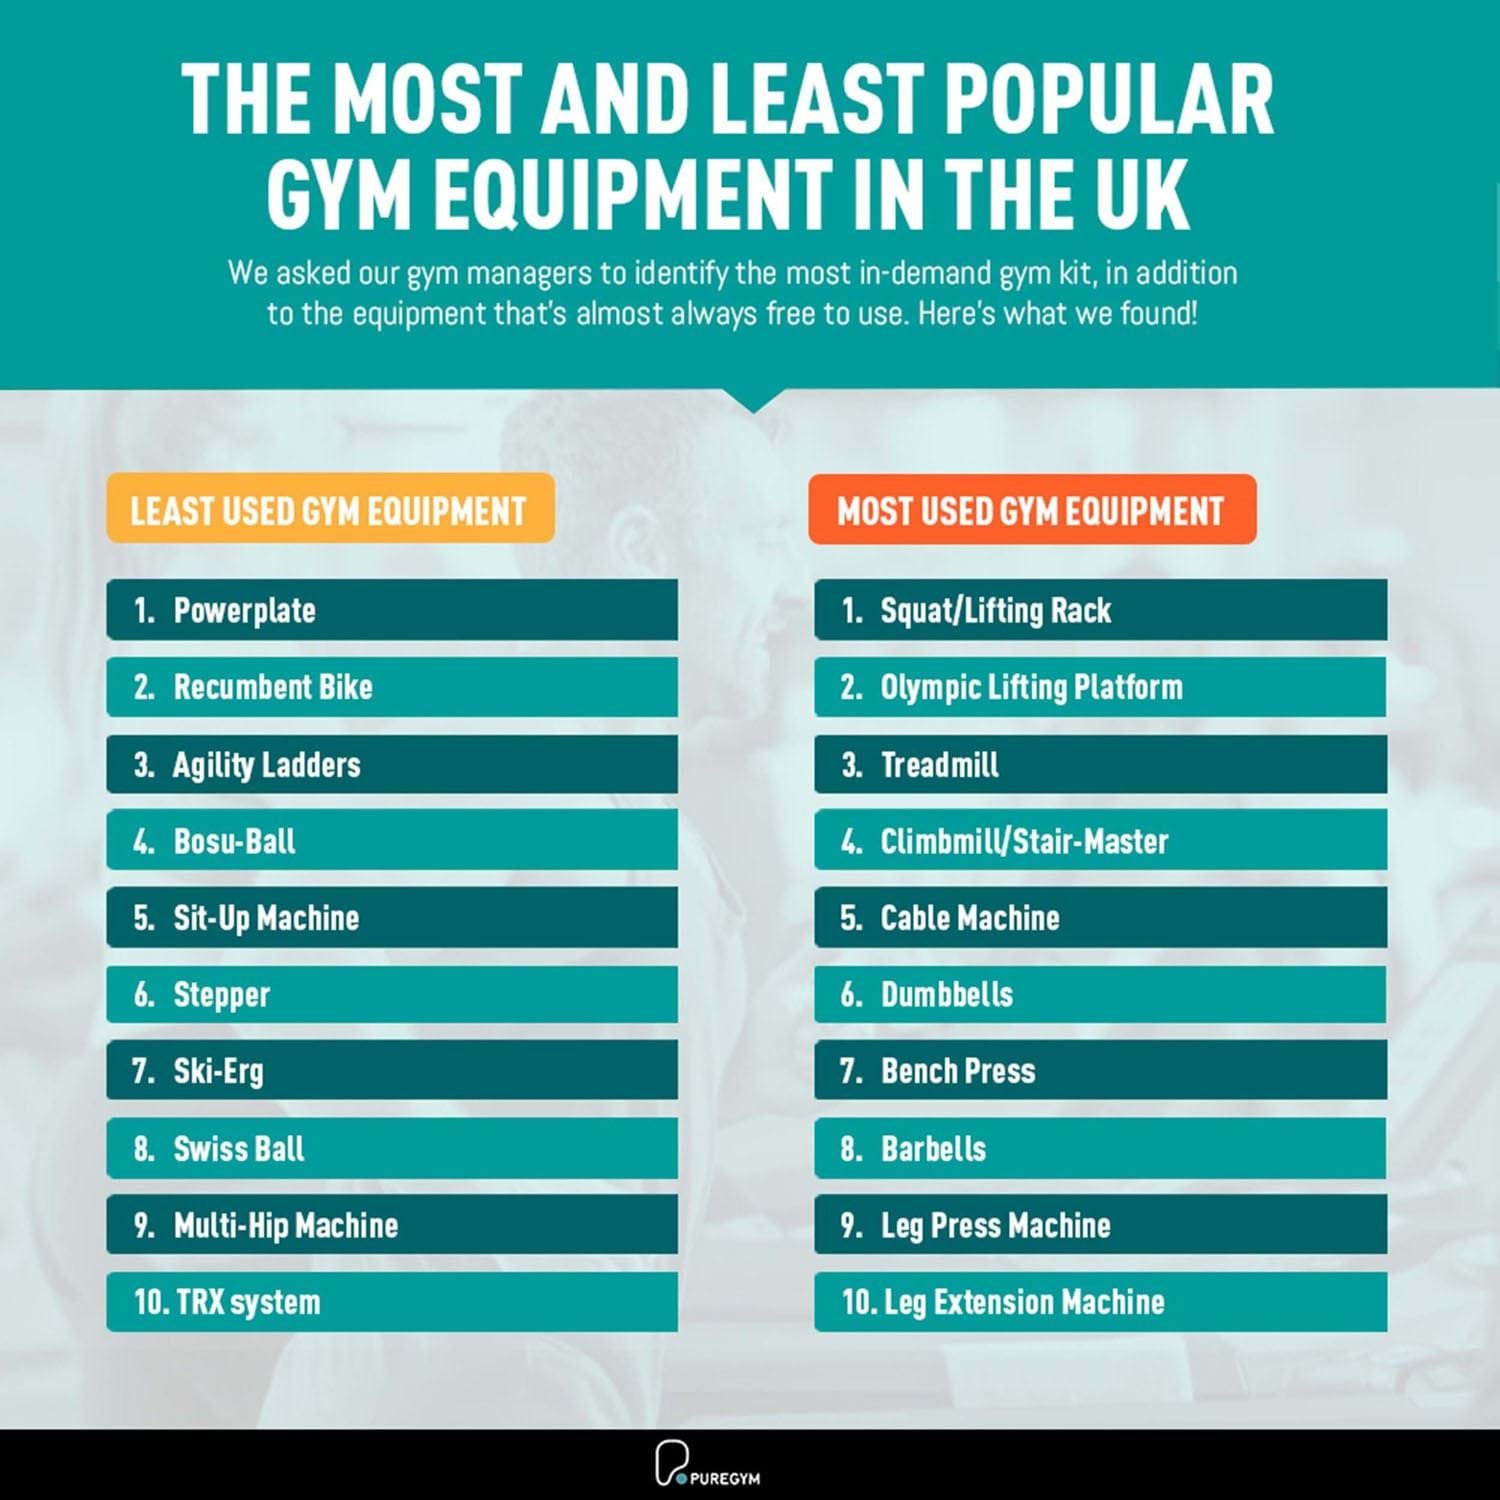 The most and least used gym equipment